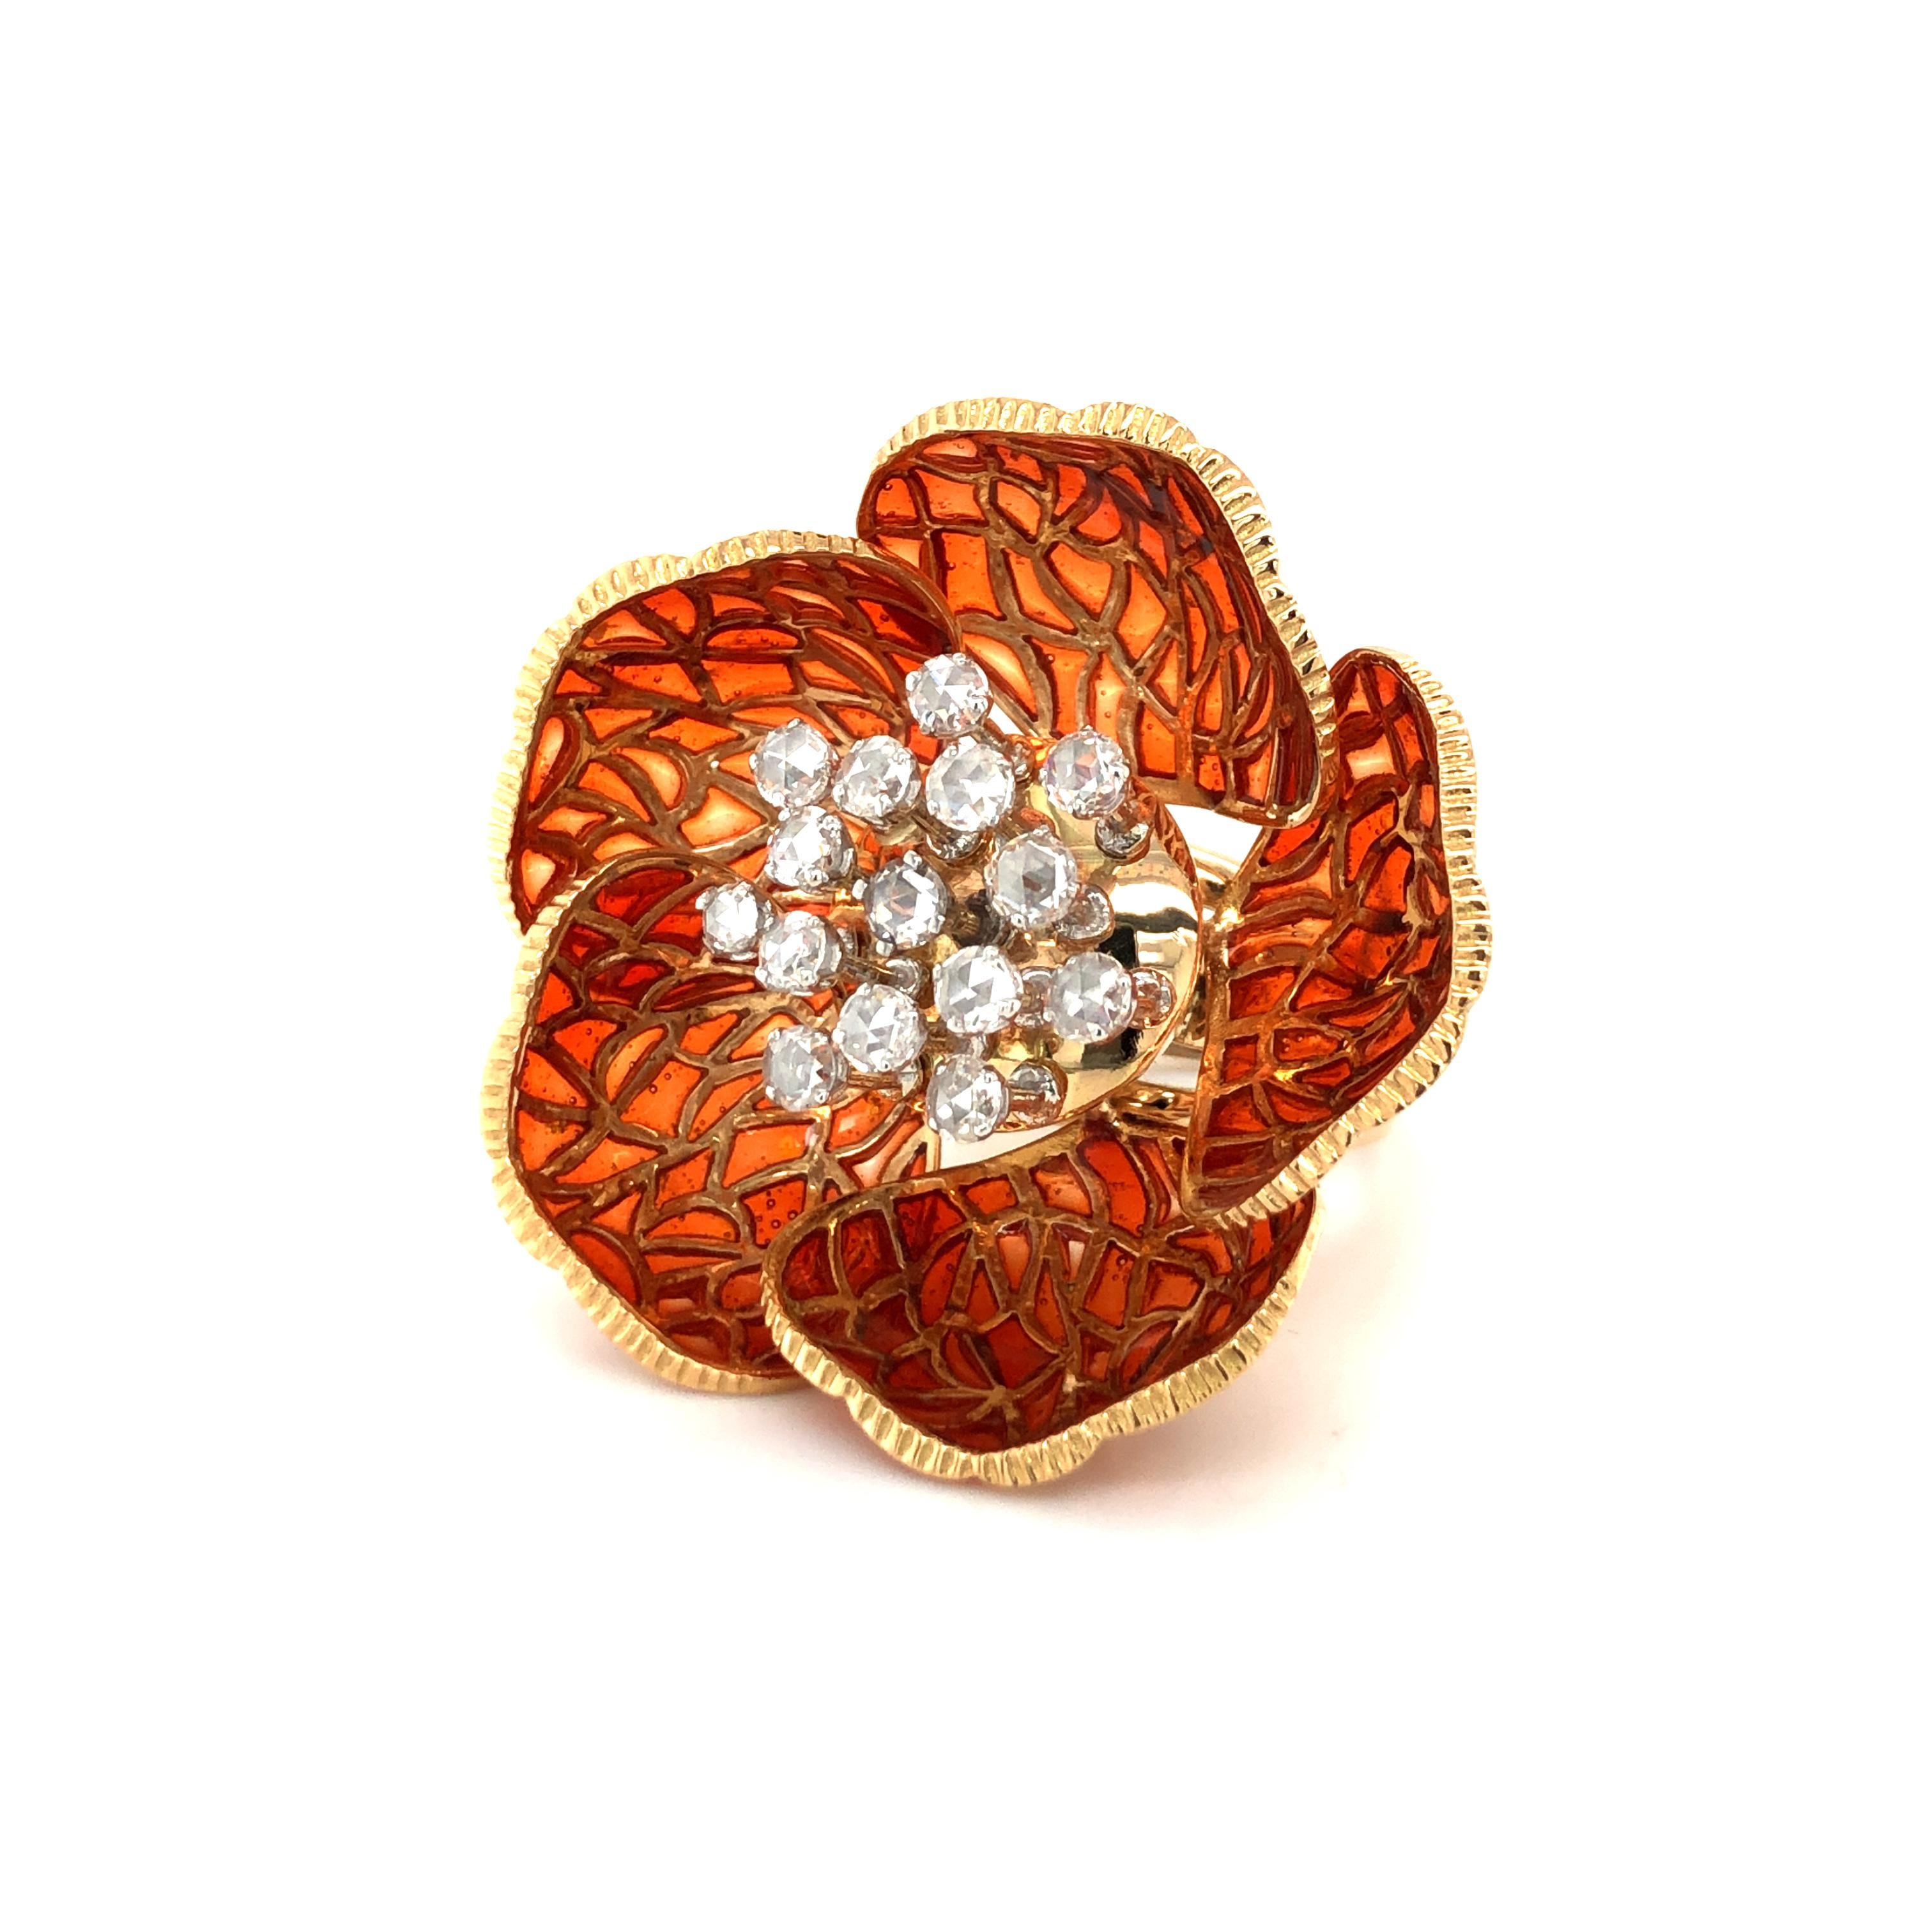 This spectacular flower ring in 18 karat yellow gold is in full bloom, the seven leaves, decorated with orange enamel, wide open. This enameling technique is called 'plique à jour' and allows the light rays to shine through the enamel.
In the centre